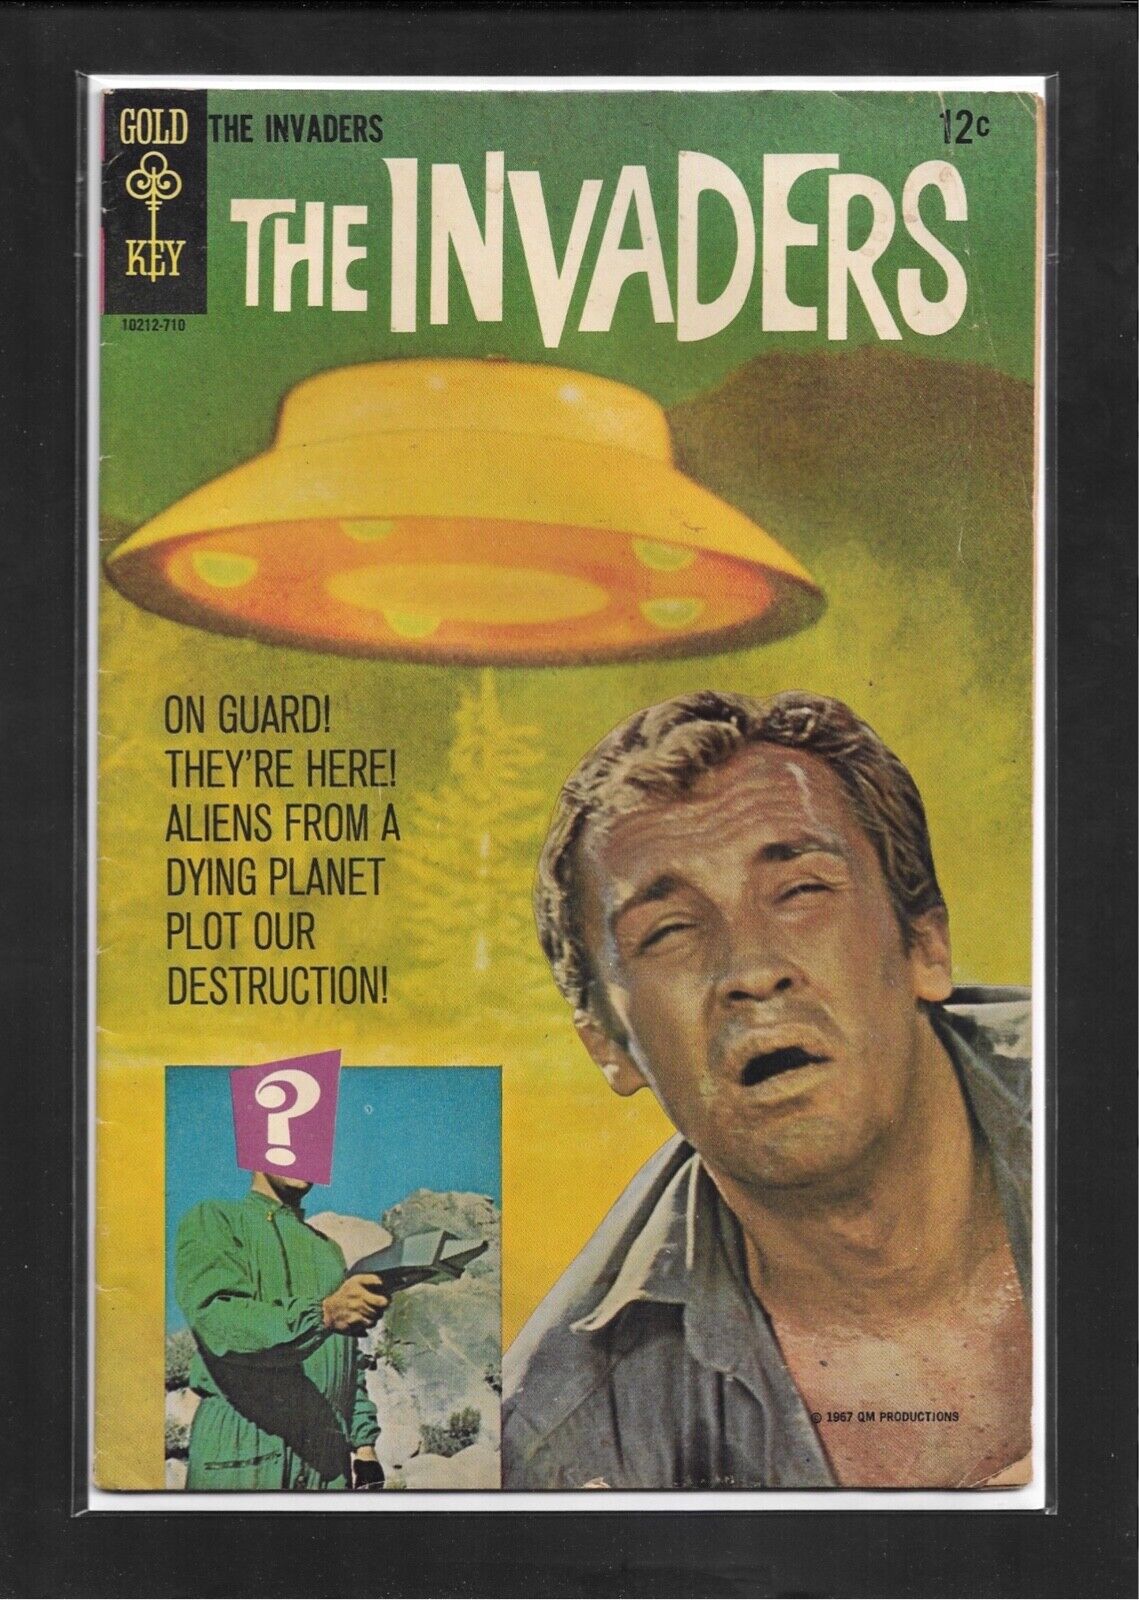 The Invaders #1 (1967): Silver Age Gold Key Sci-Fi Photo Cover VG+ (4.5)